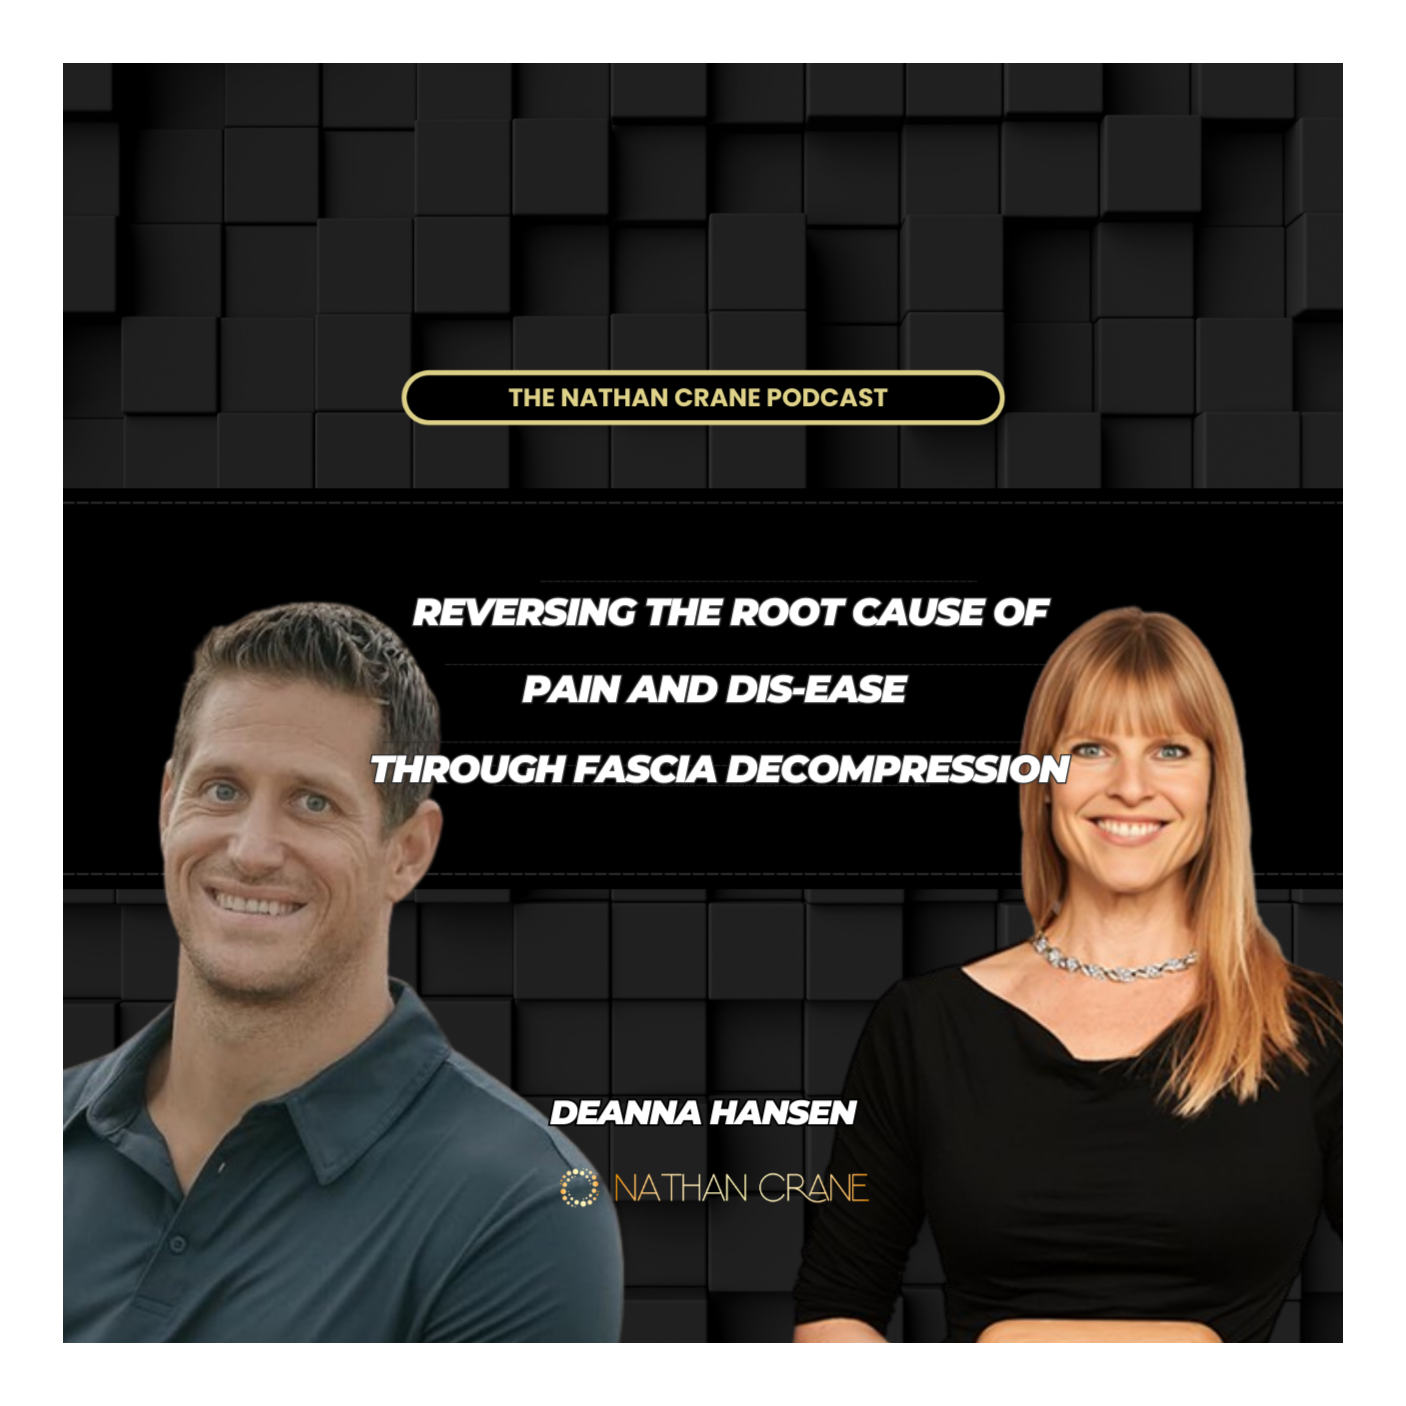 Deanna Hansen: Reversing PAIN and DIS-EASE with Fascia Decompression | Nathan Crane Podcast